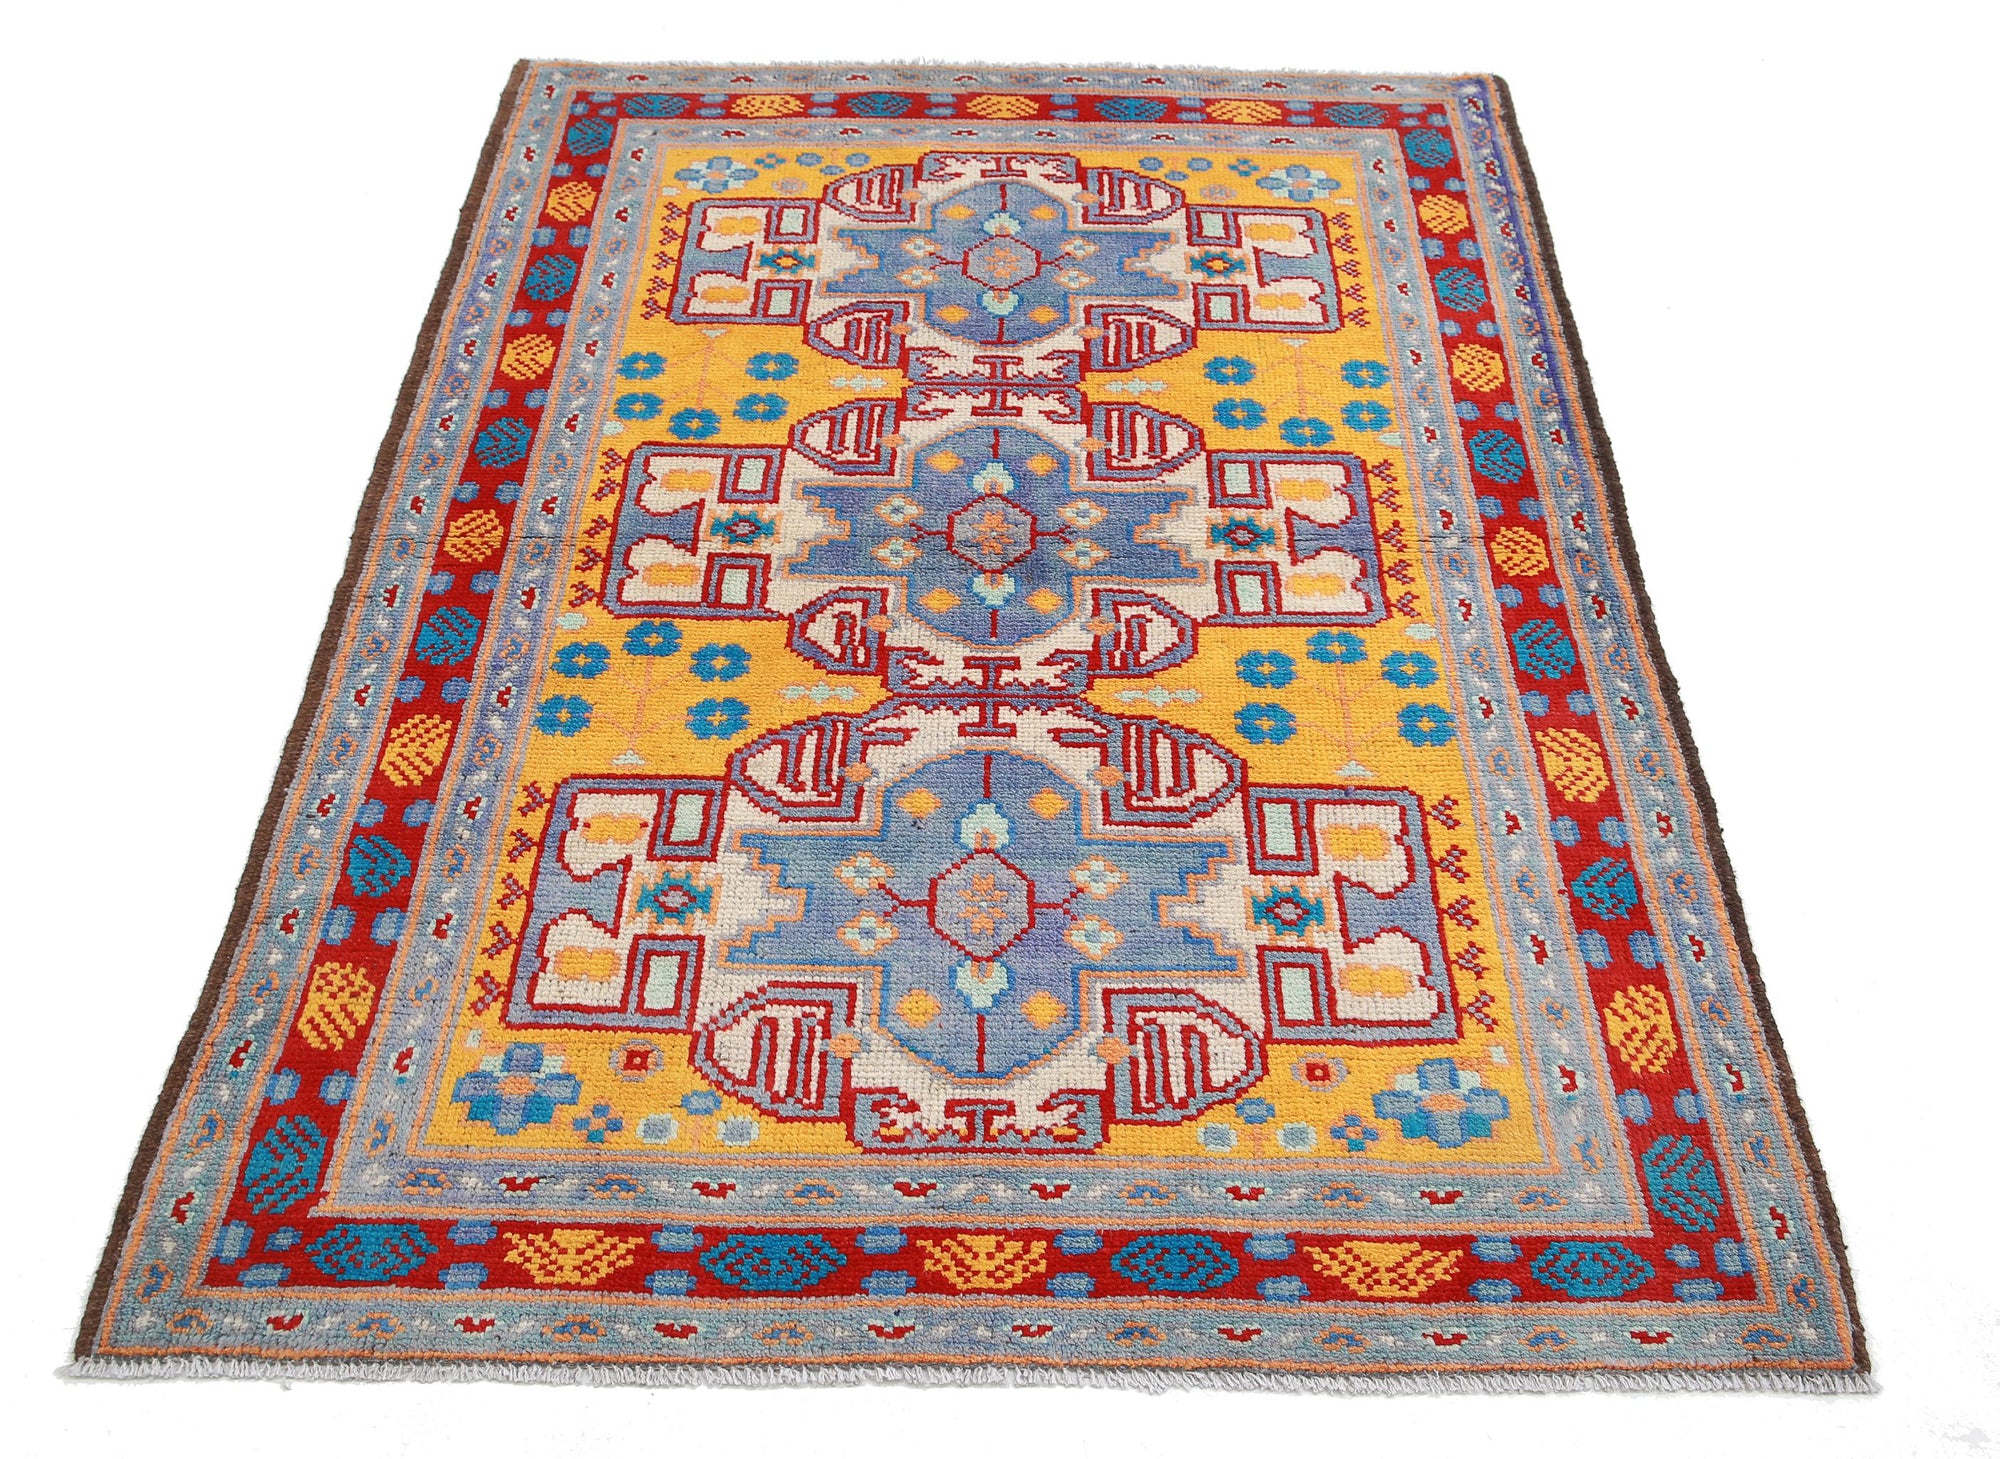 Revival-hand-knotted-qarghani-wool-rug-5014213-3.jpg